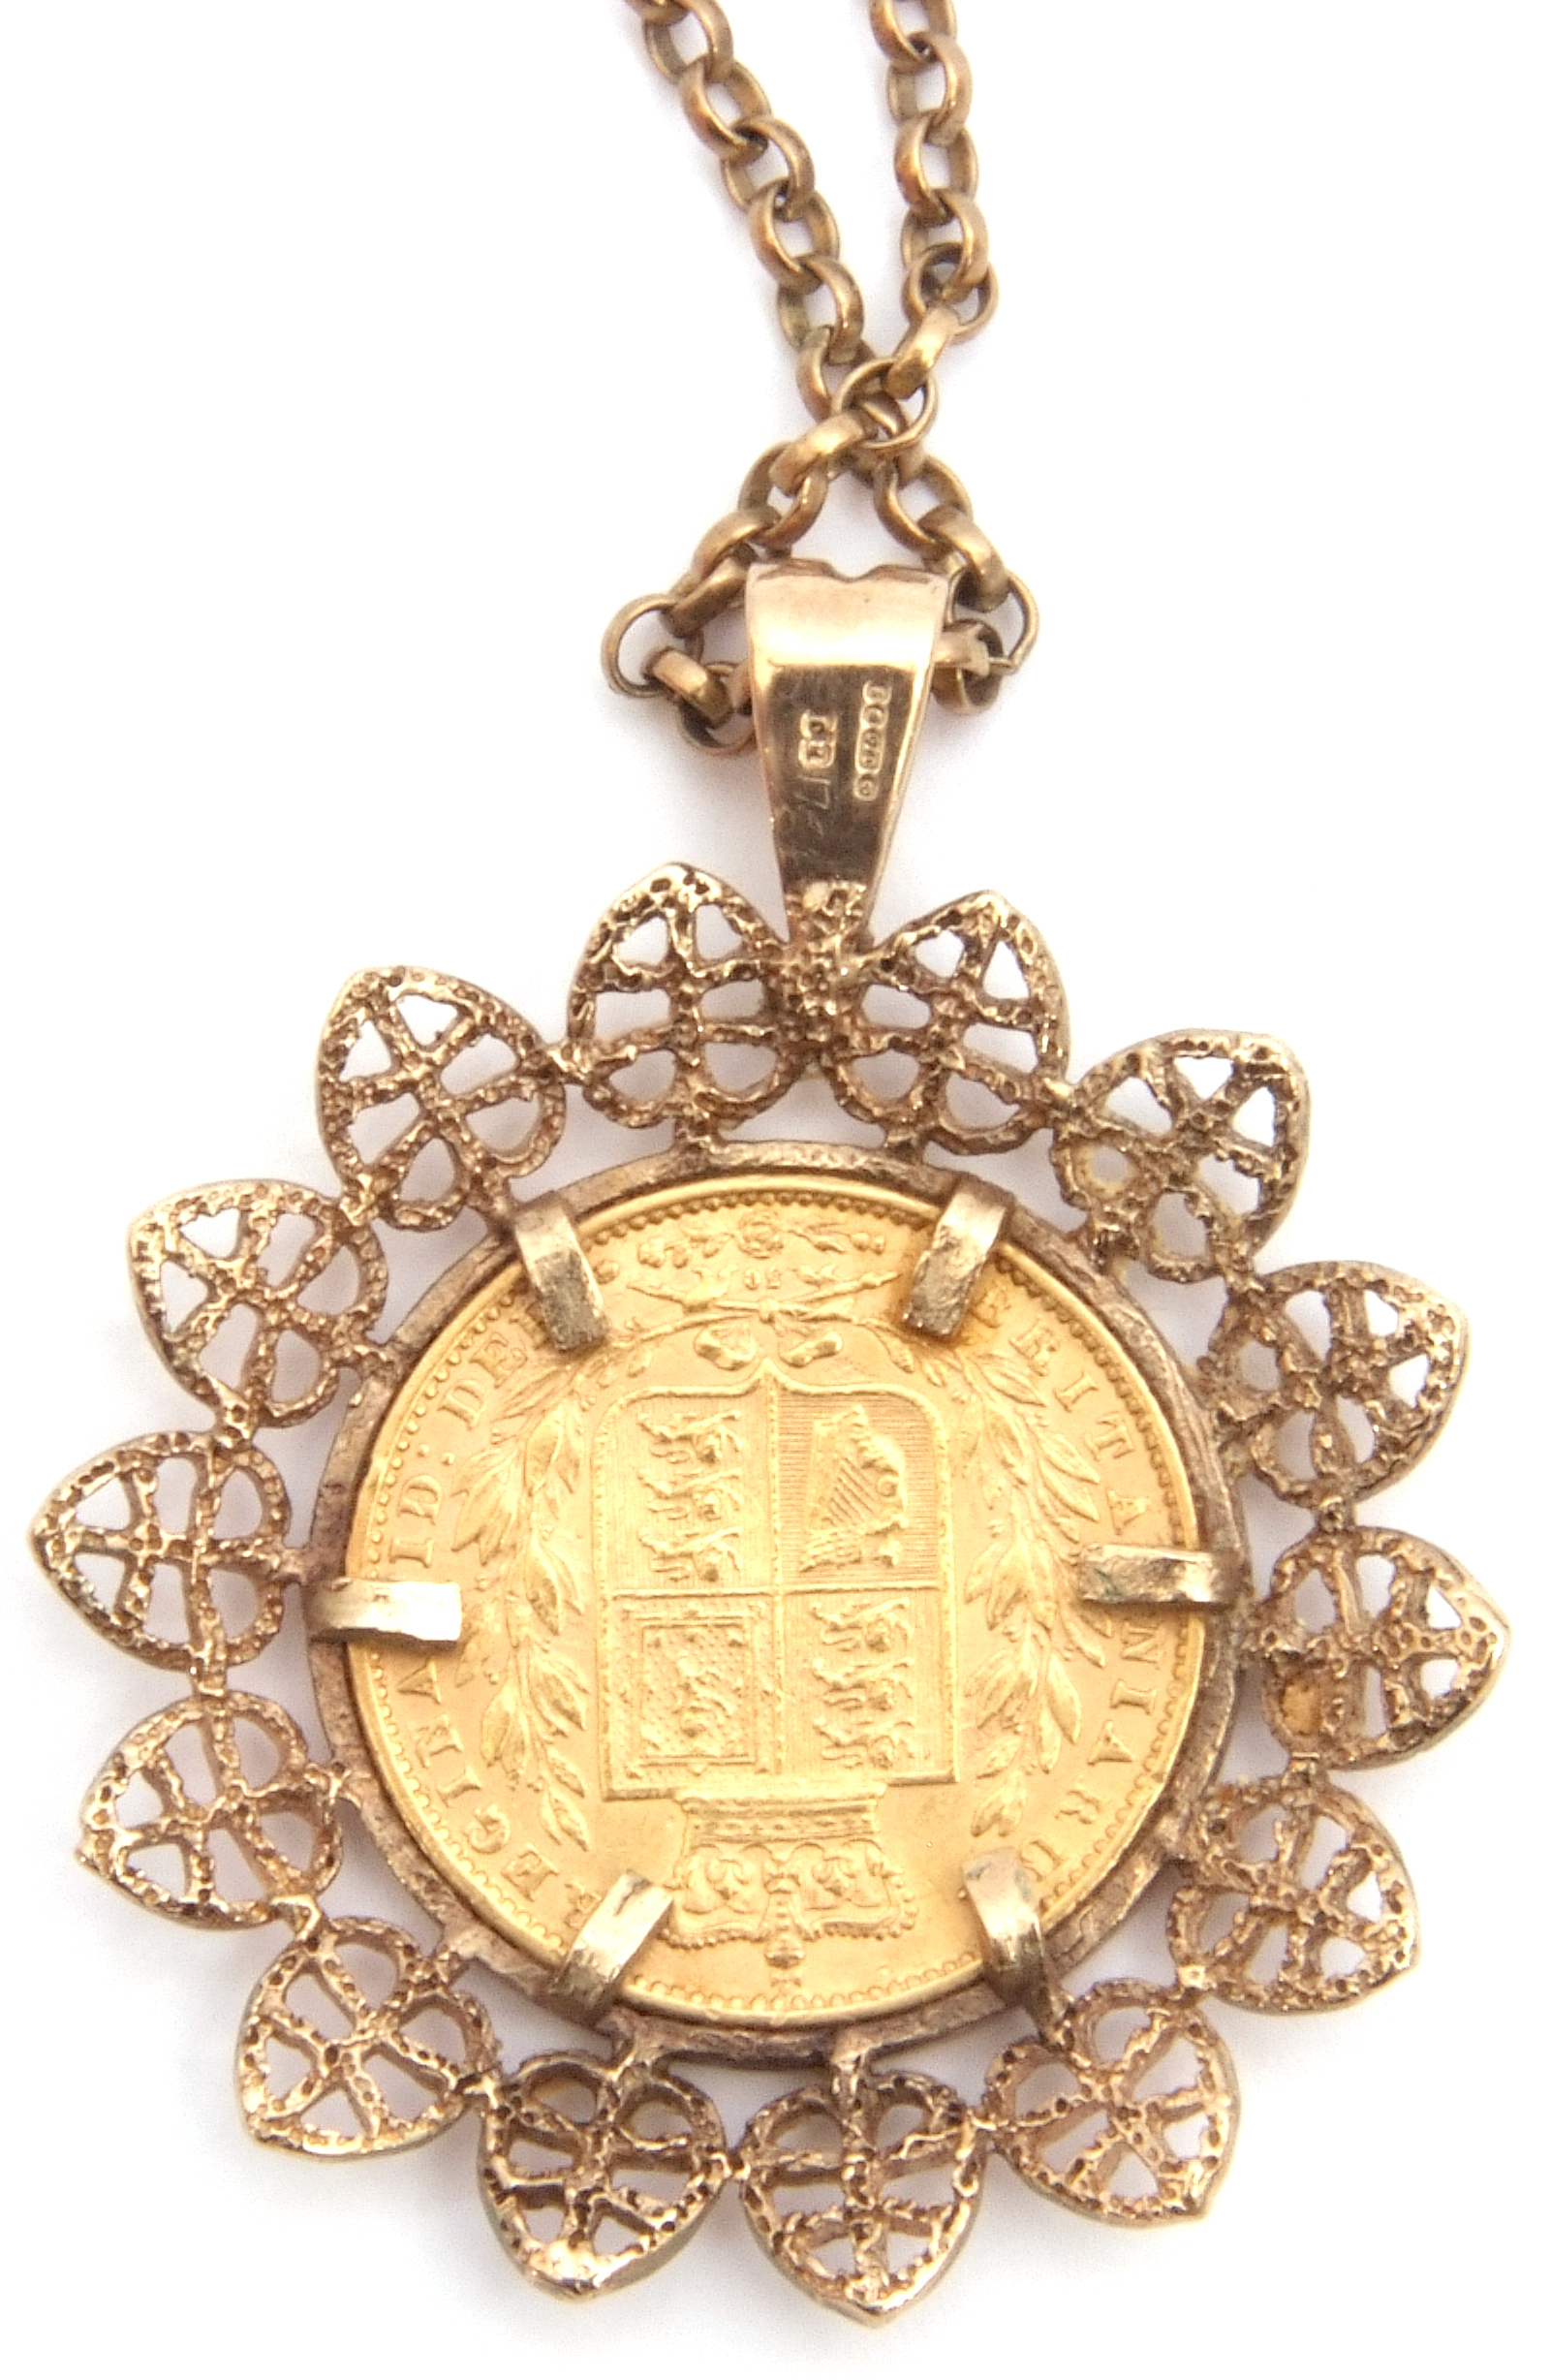 Victorian gold shield back sovereign within a hallmarked 9ct gold filigree leaf edge design pendant, - Image 4 of 4